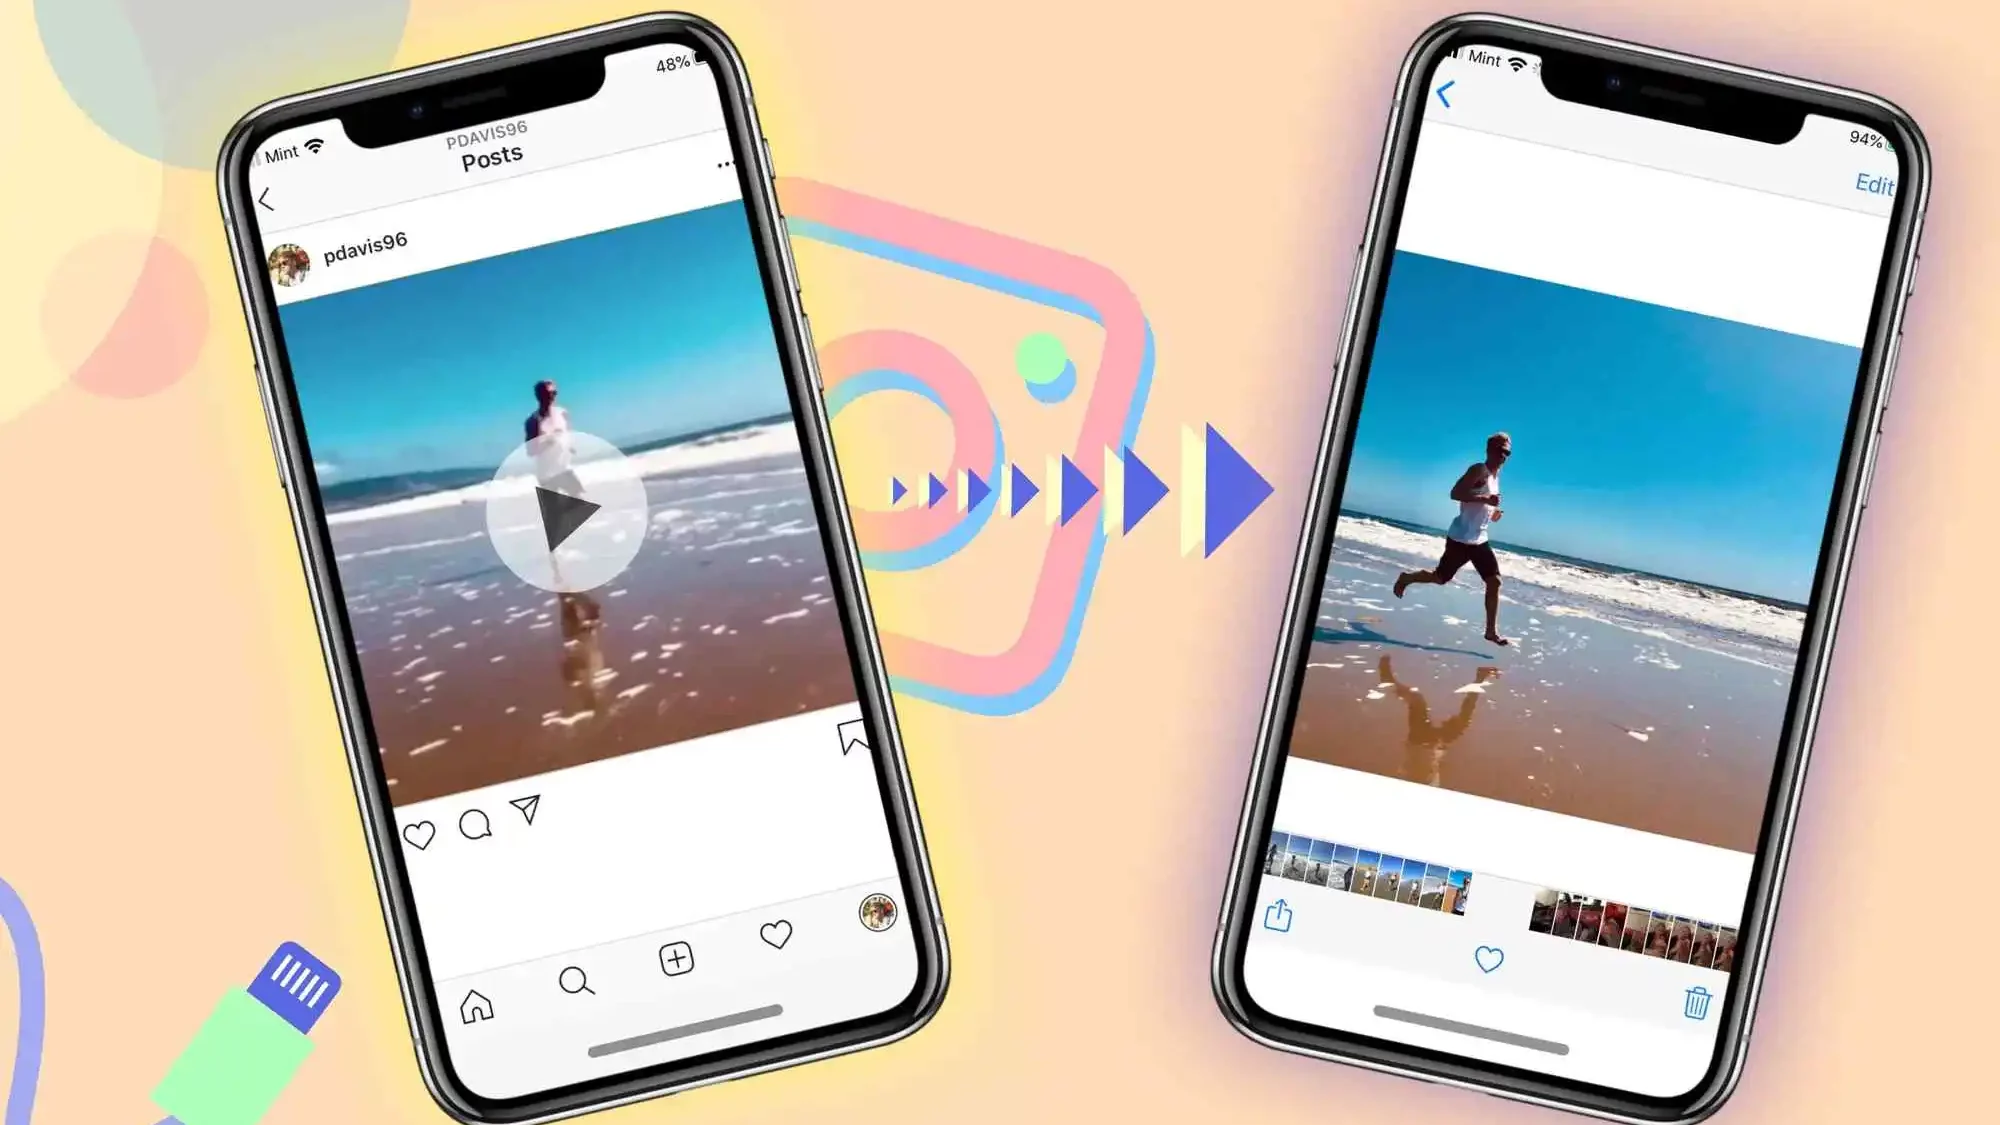 How To Post Landscape Video On Instagram Reels And Stories? Easy Way Here!